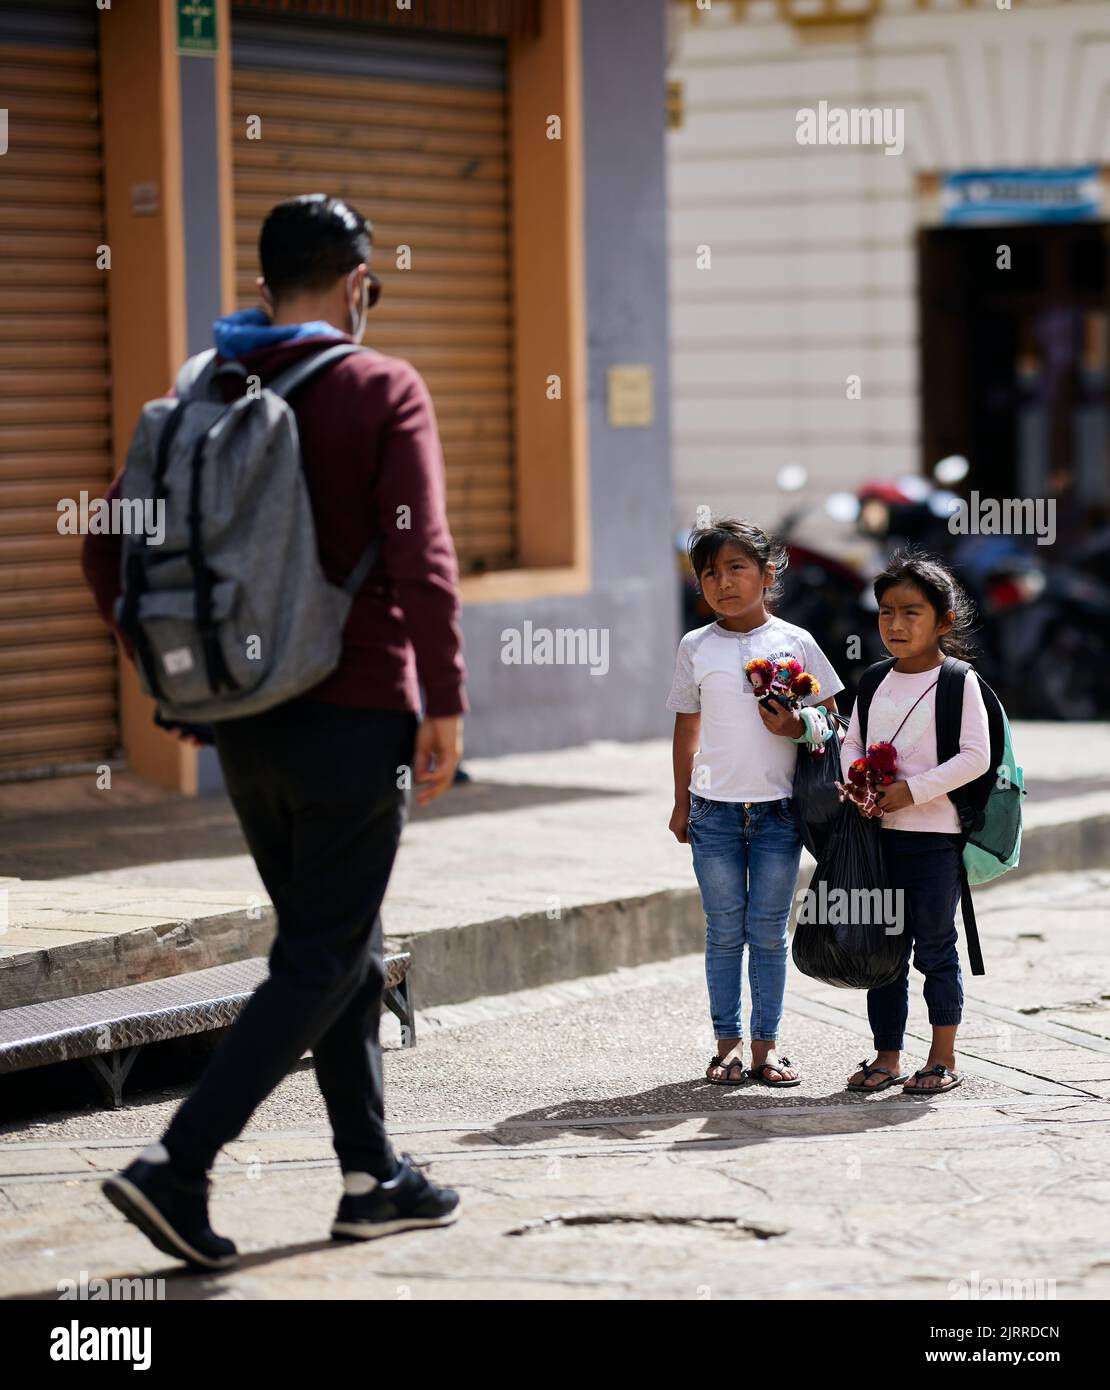 Two girls selling handmade crafts to a male tourist during the pandemic in San Cristobal, Mexico Stock Photo